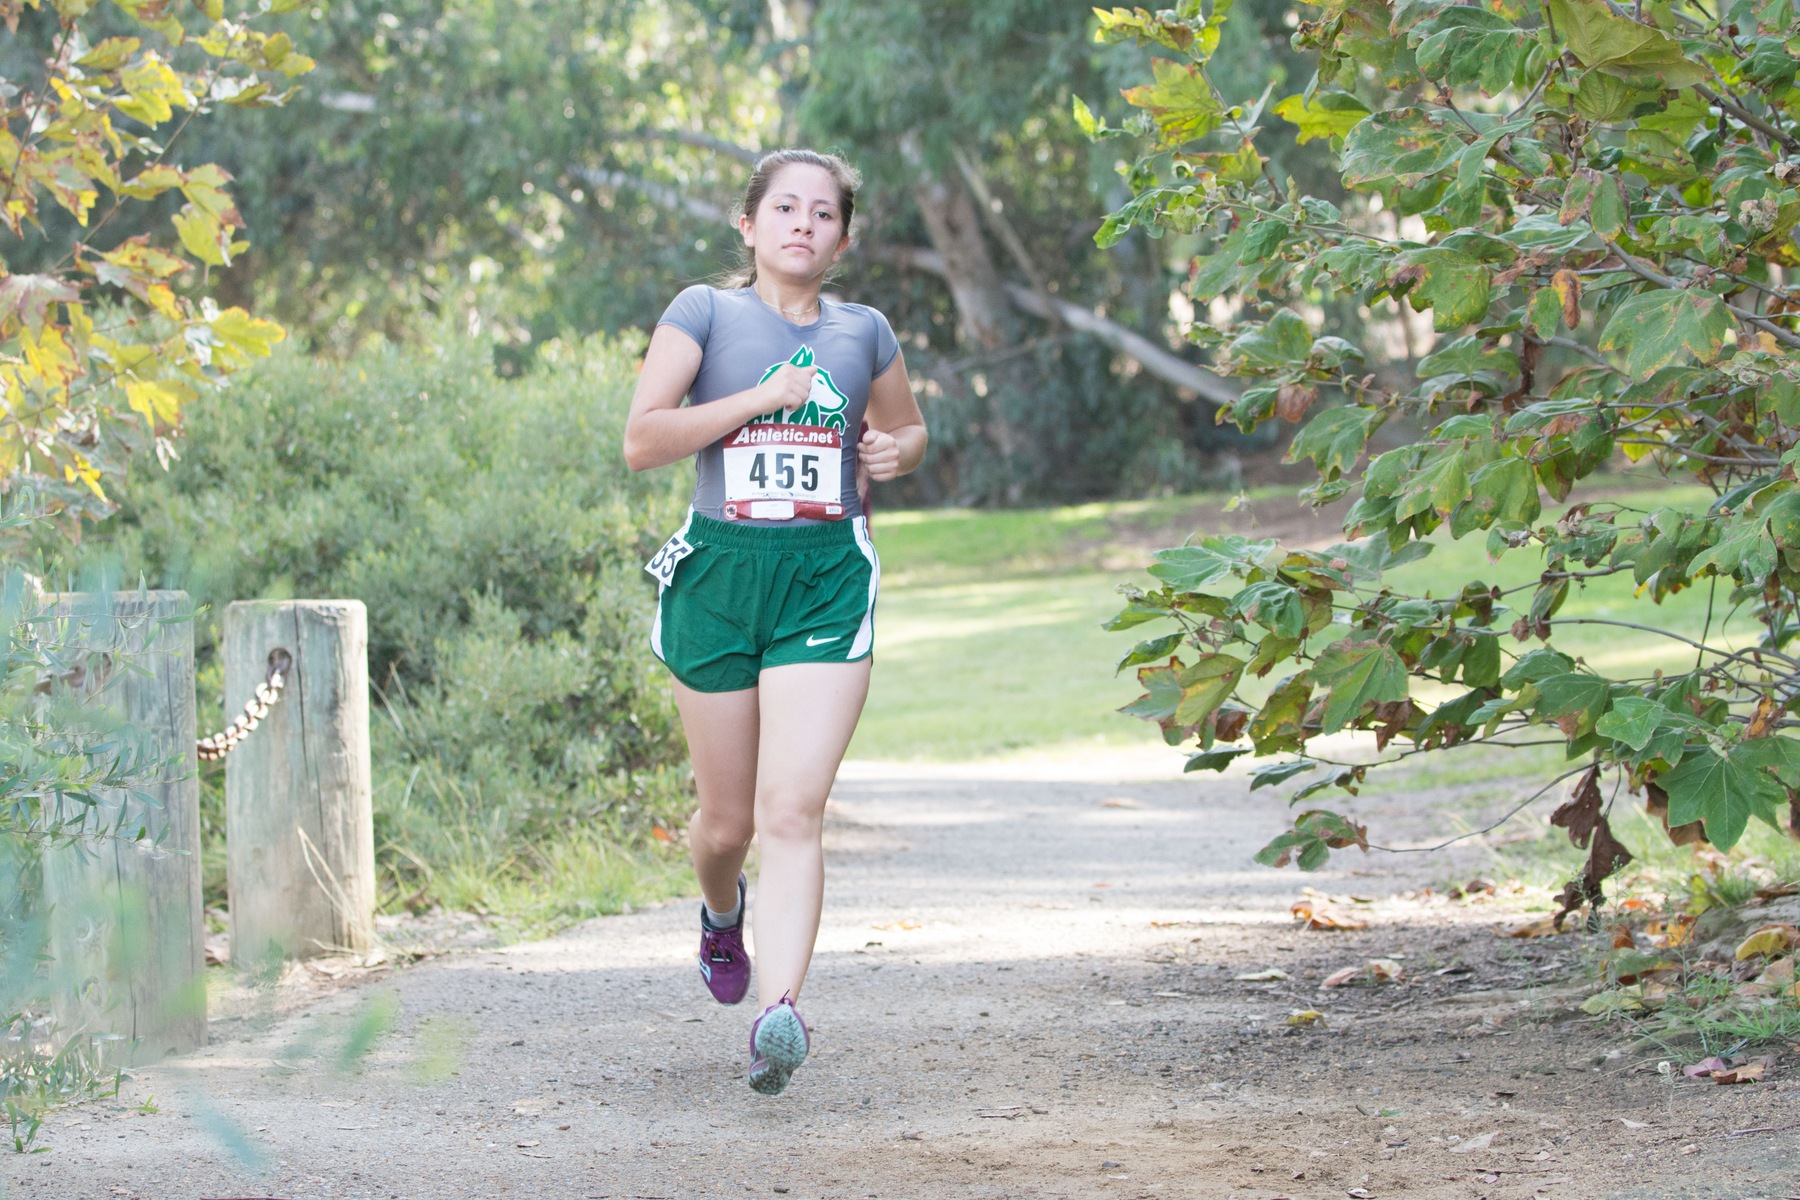 Freshman Daria Ayala pulls ahead of the pack she was in at the Golden West Cross Country Invite. (Photo by Tadzio Garcia)